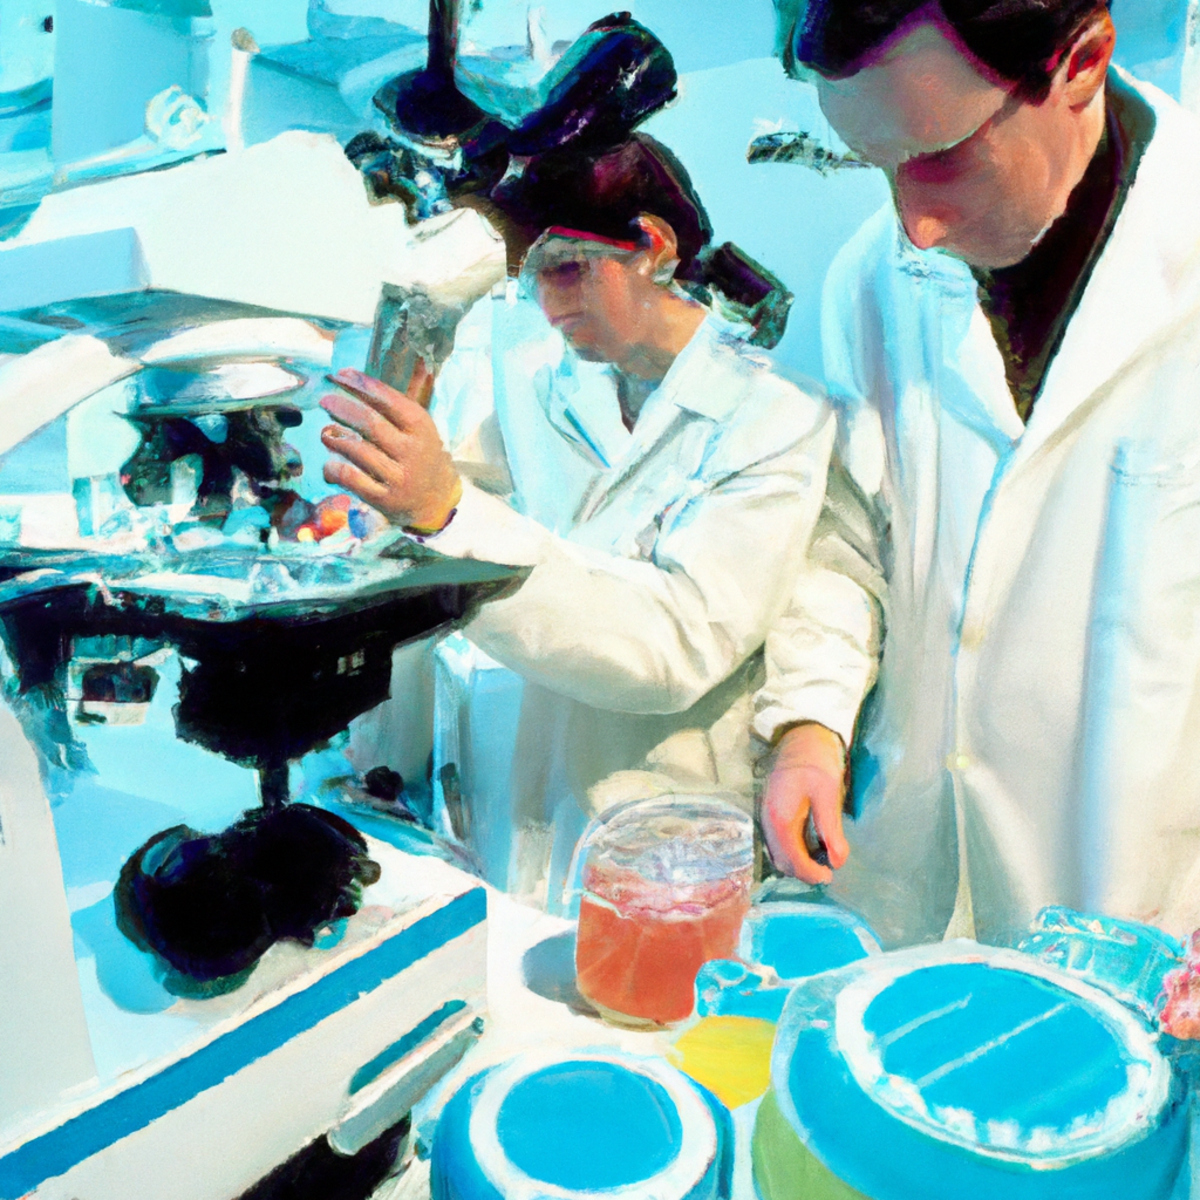 Scientists in lab coats working diligently in a well-equipped research facility, conducting experiments and analyzing data.